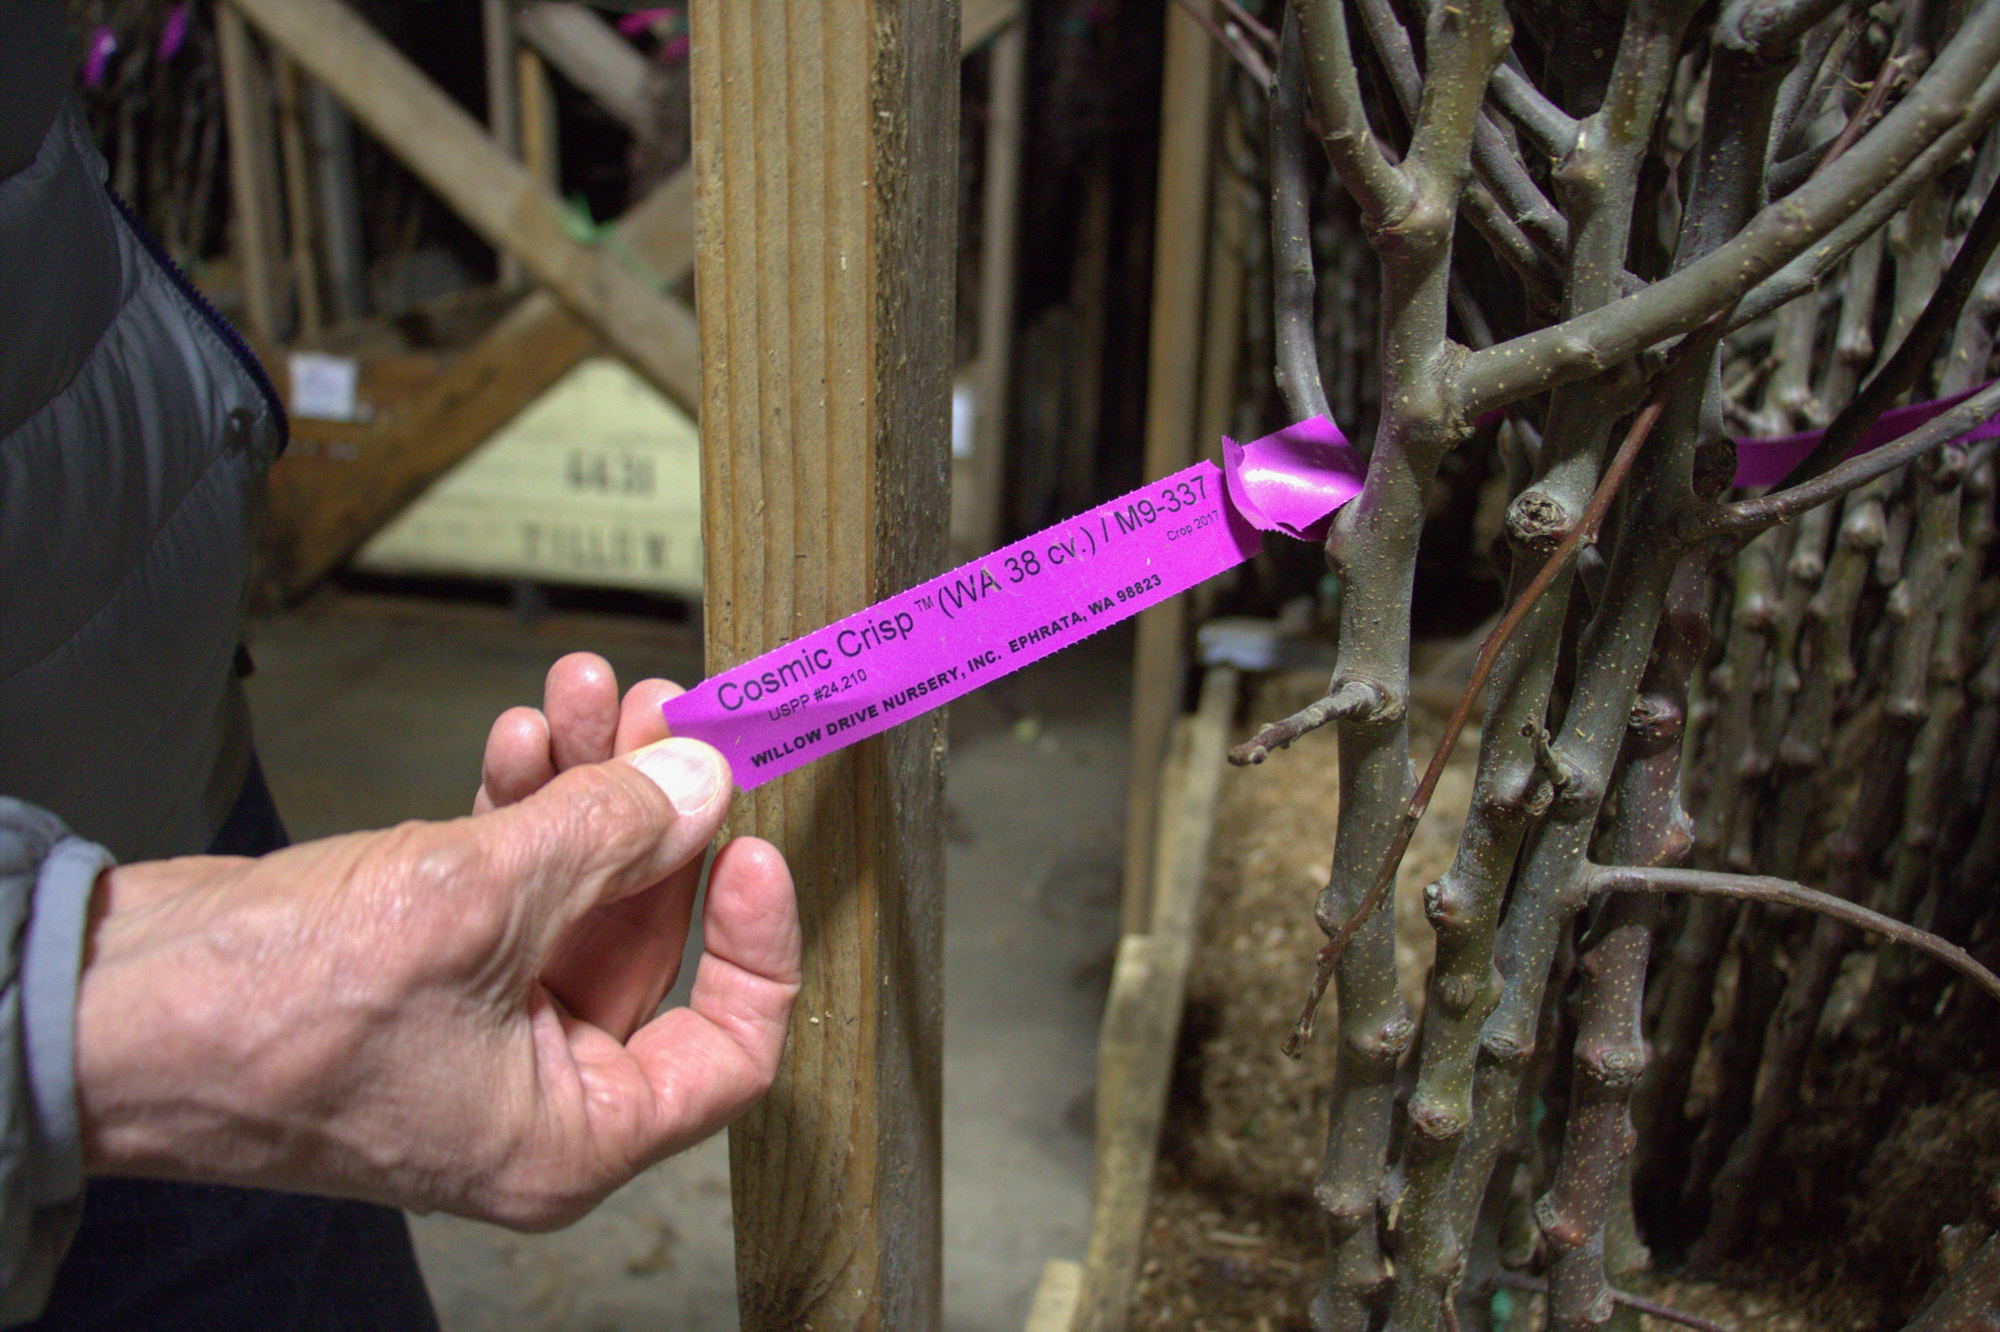 This new Cosmic Crisp tree at Willow Drive Nursery, in Ephrata, Wash., relies on a rootstock called M9-337.